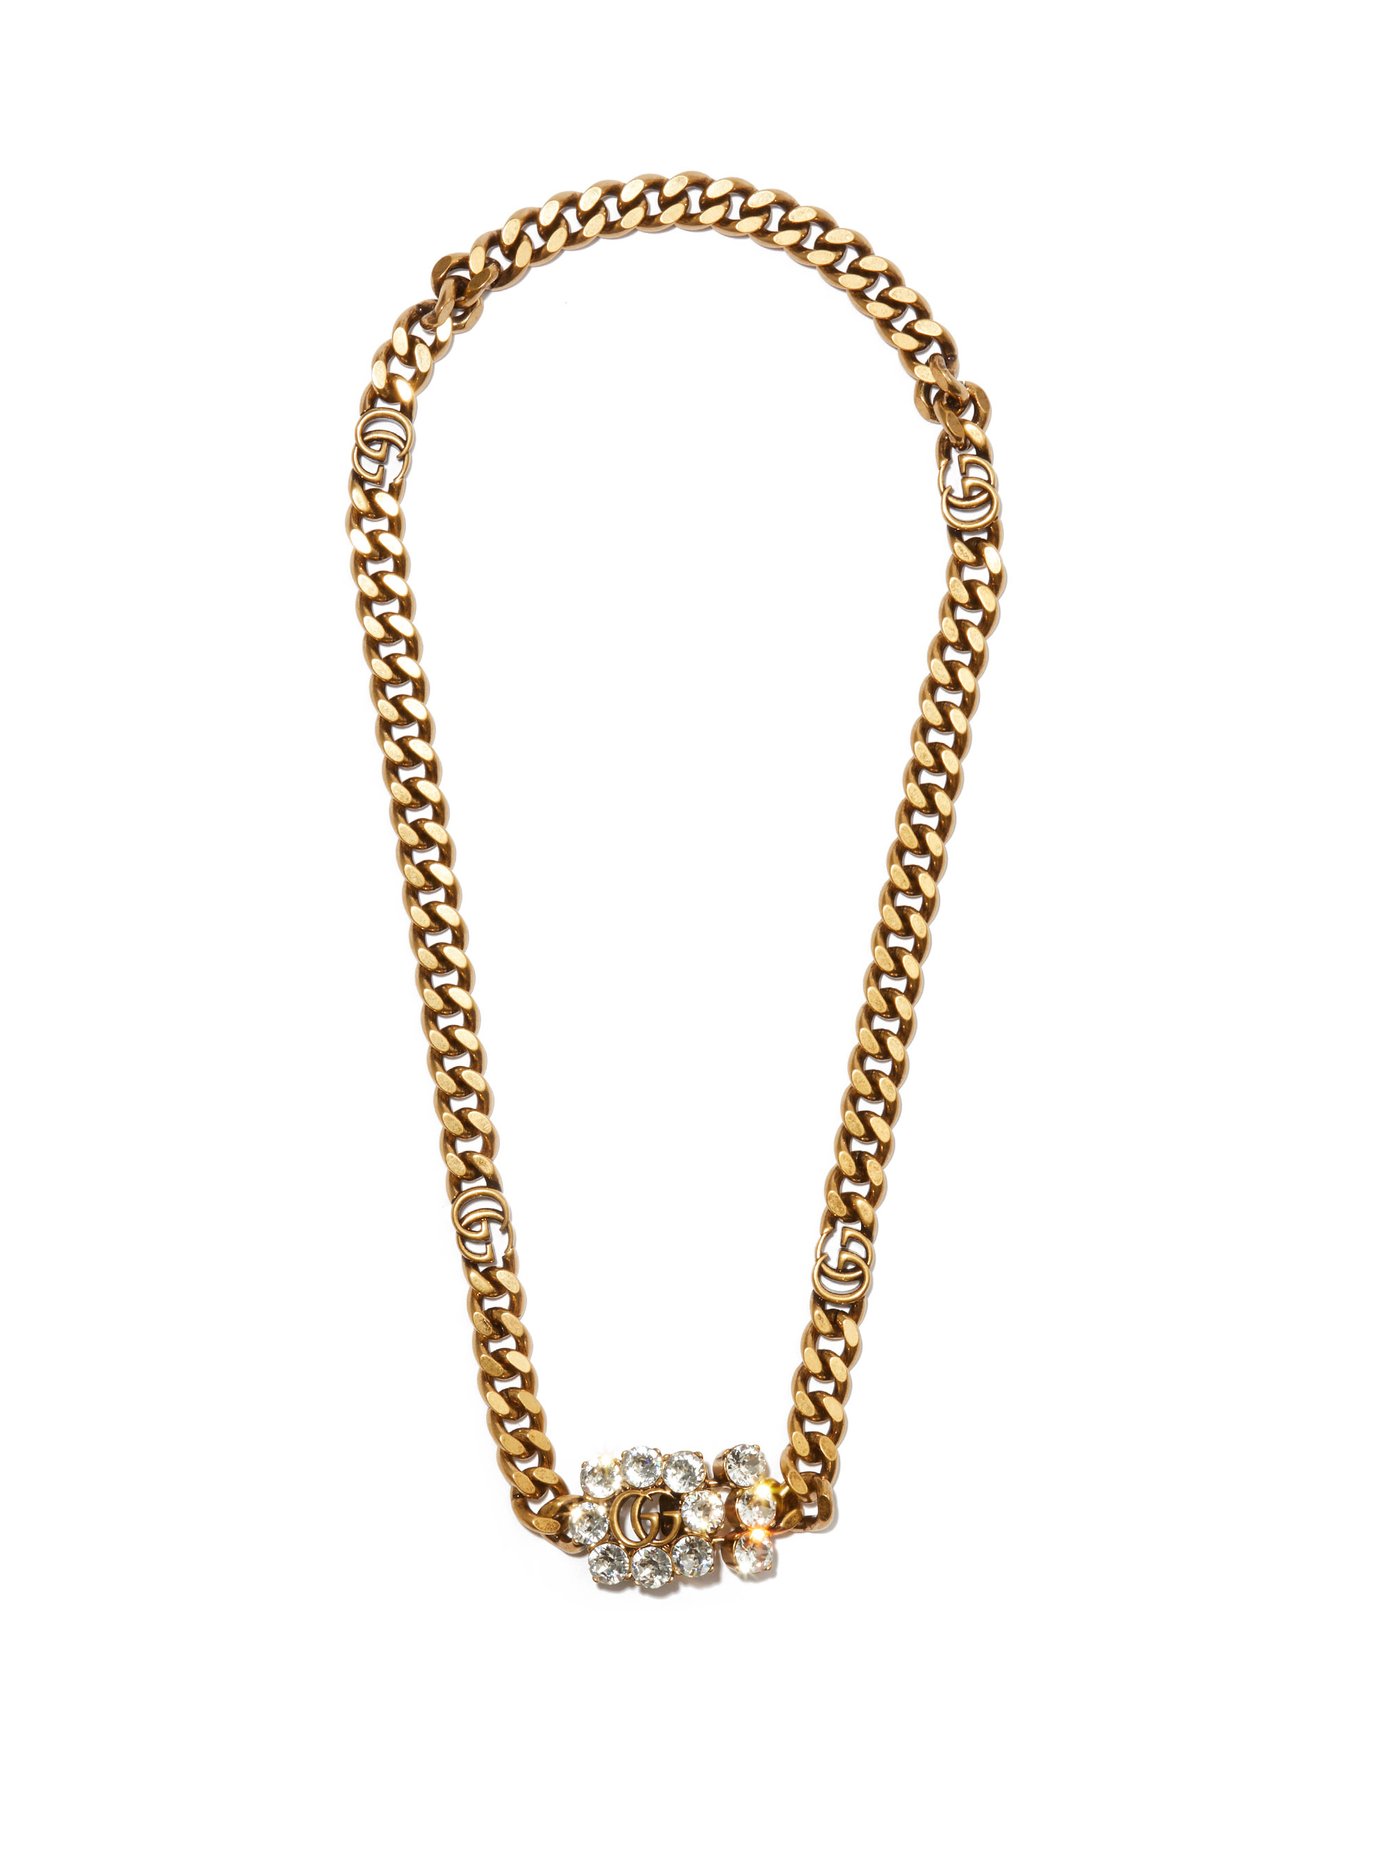 gucci chain link necklace